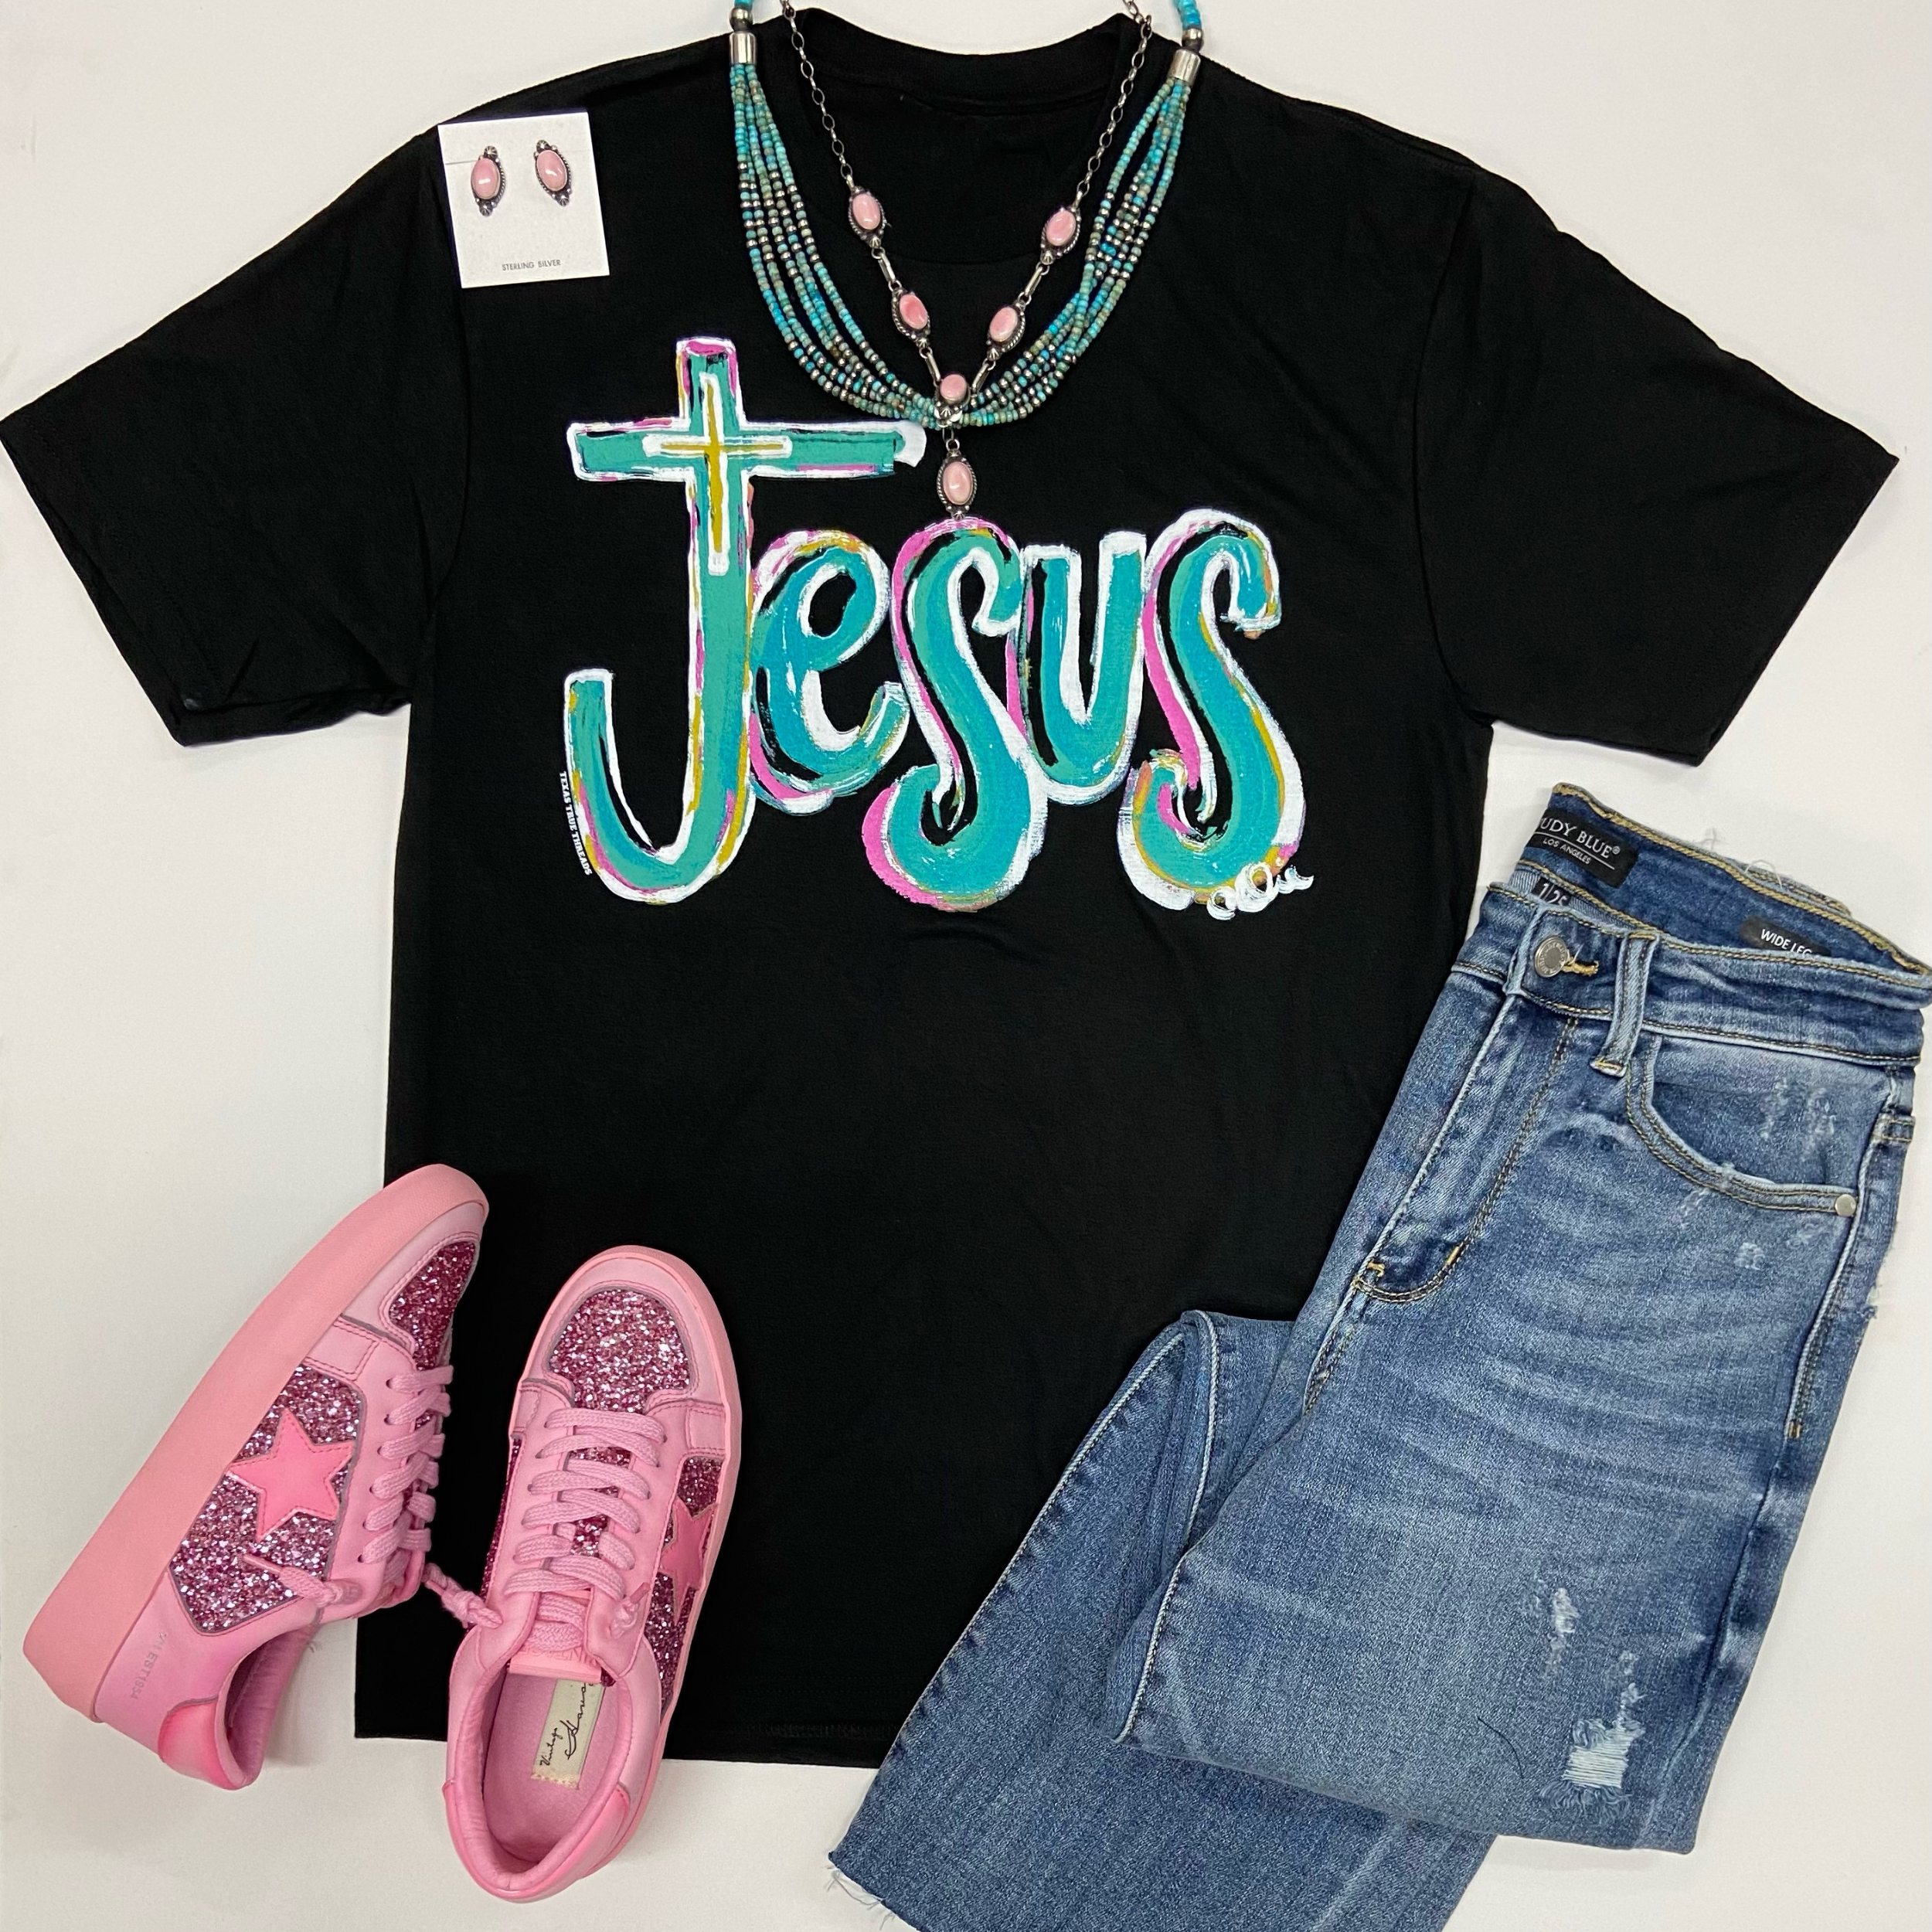 A black tee shirts with a crew neckline, short sleeves, and a graphic that says "Jesus" in turquoise writing. This tee is pictured on a white background with hot pink sneakers, Navajo jewelry, and light wash jeans.